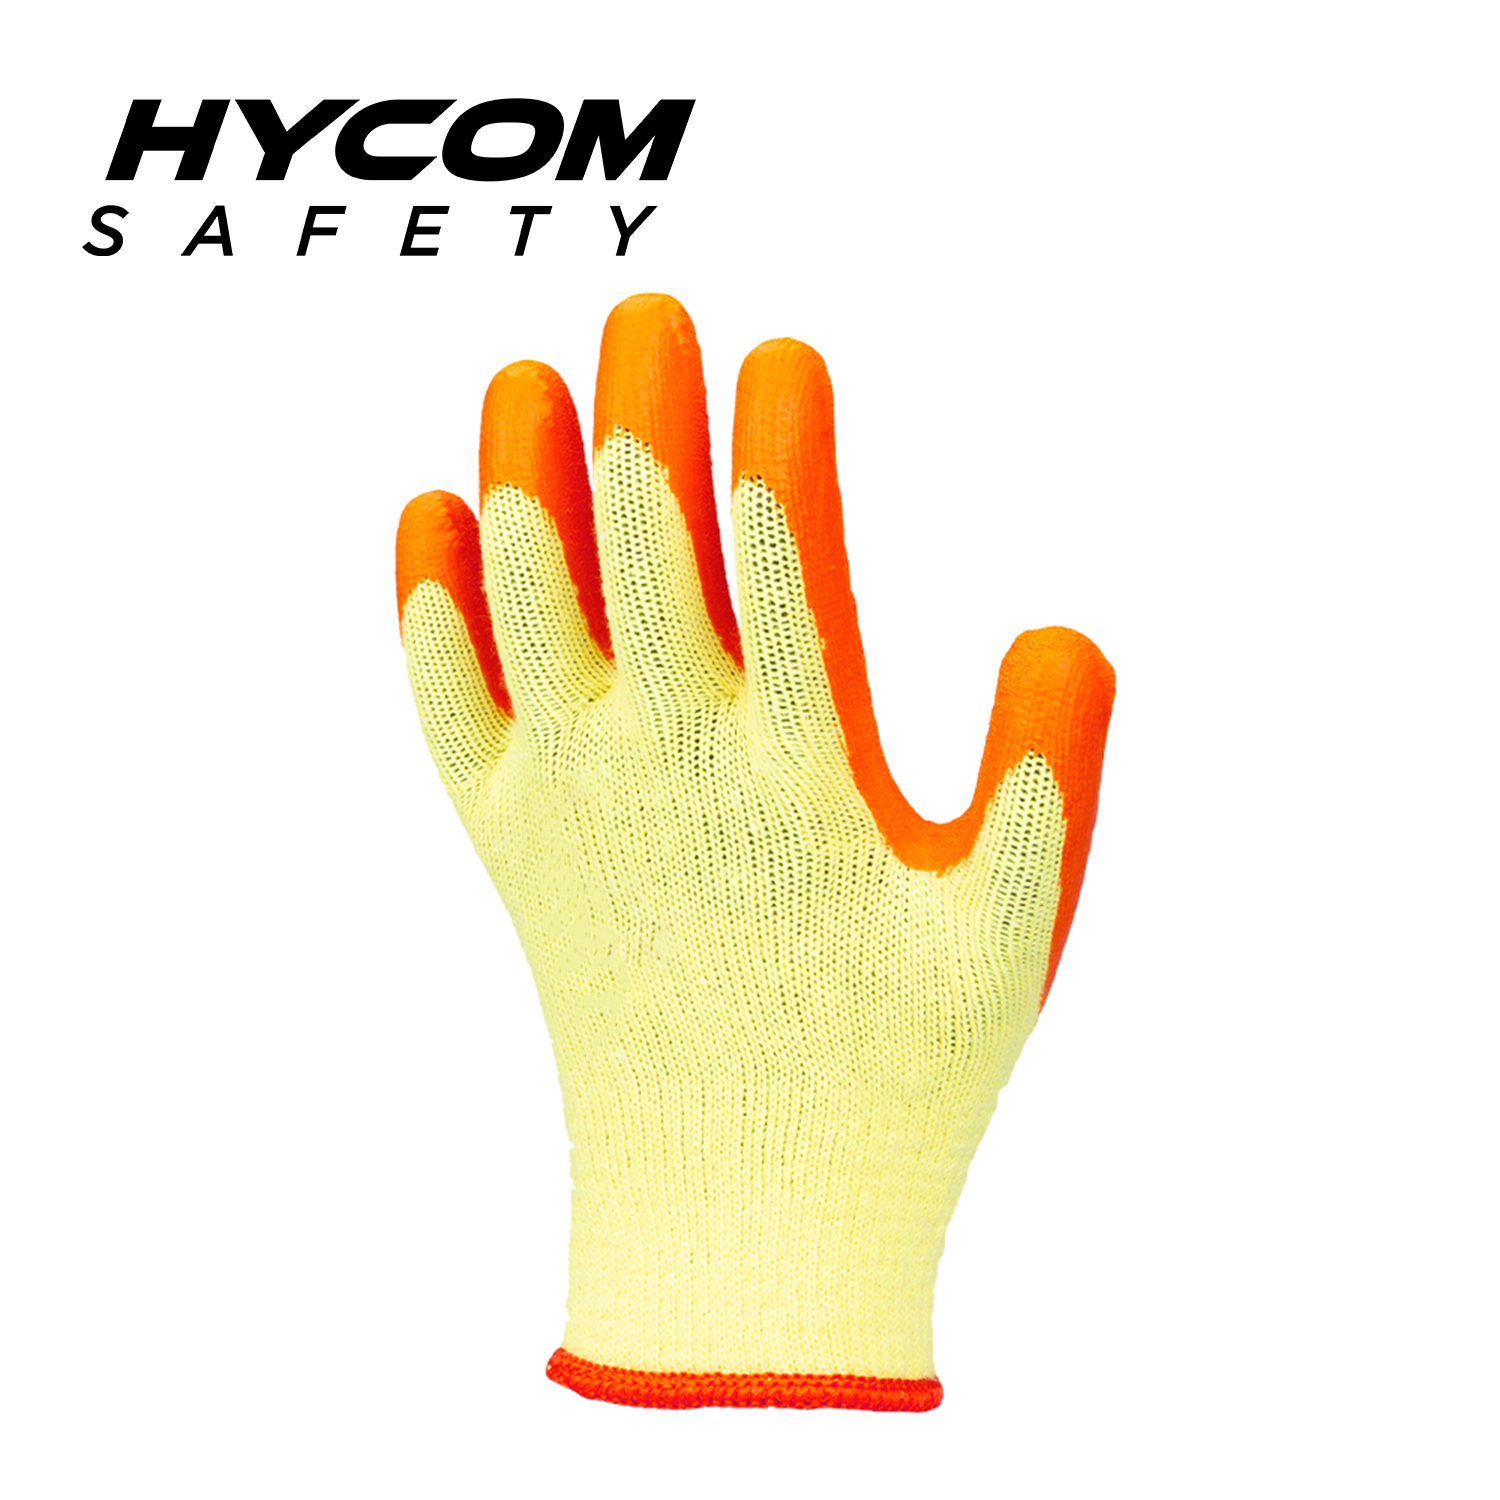 HYCOM 10G Cotton/polyester Work Glove with Palm Crinkle Latex Coating Super Grip General Purpose Glove